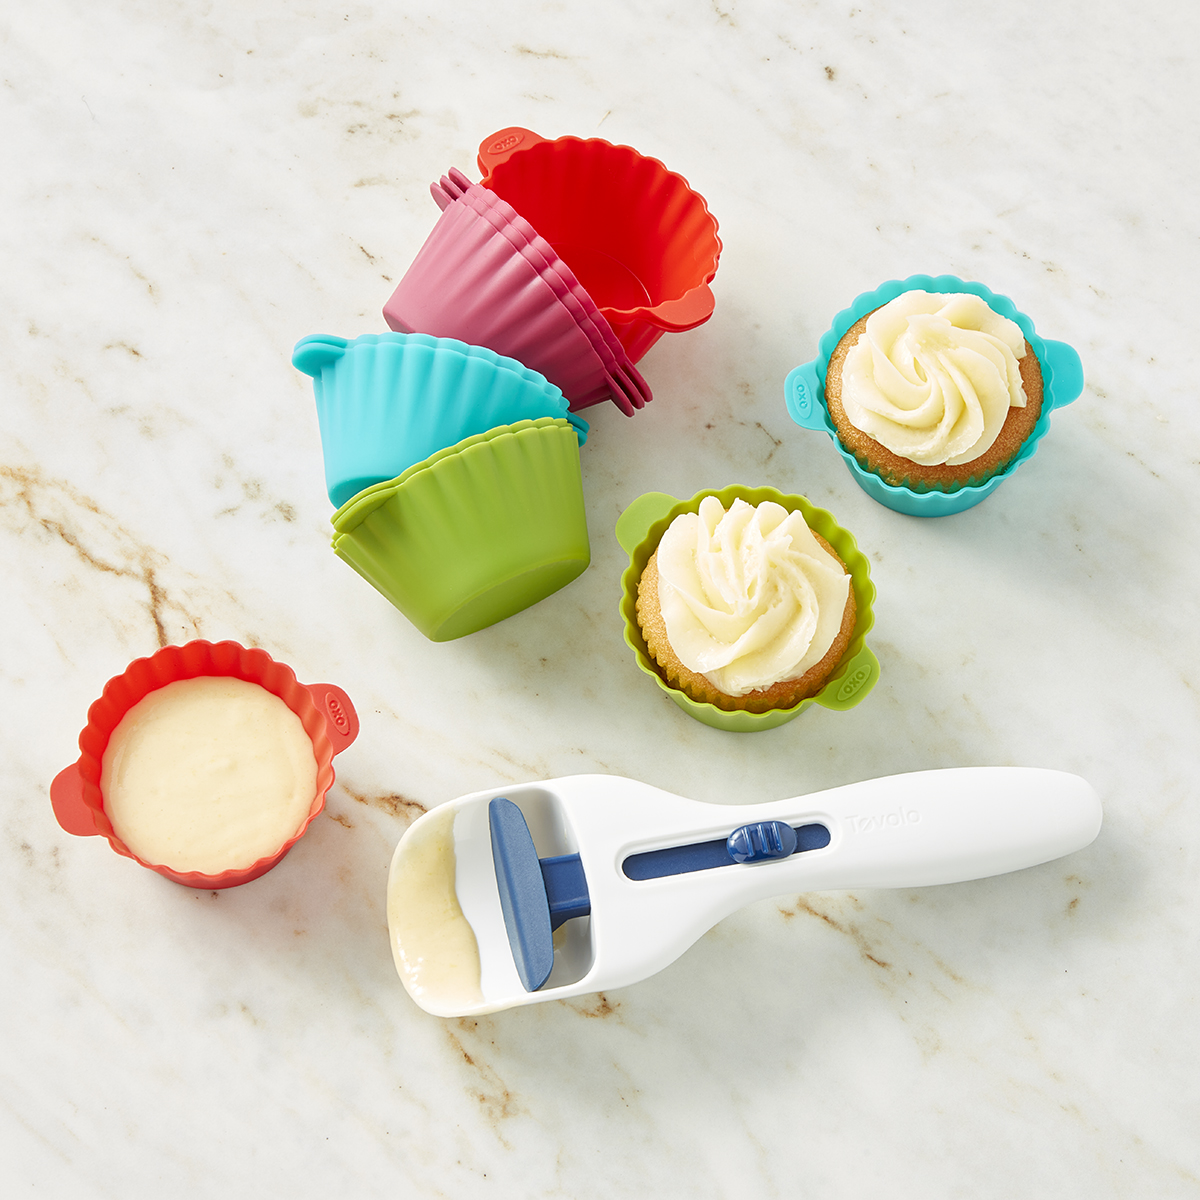 https://www.containerstore.com/catalogimages/431925/HL_21_Cupcake_scoop.jpg